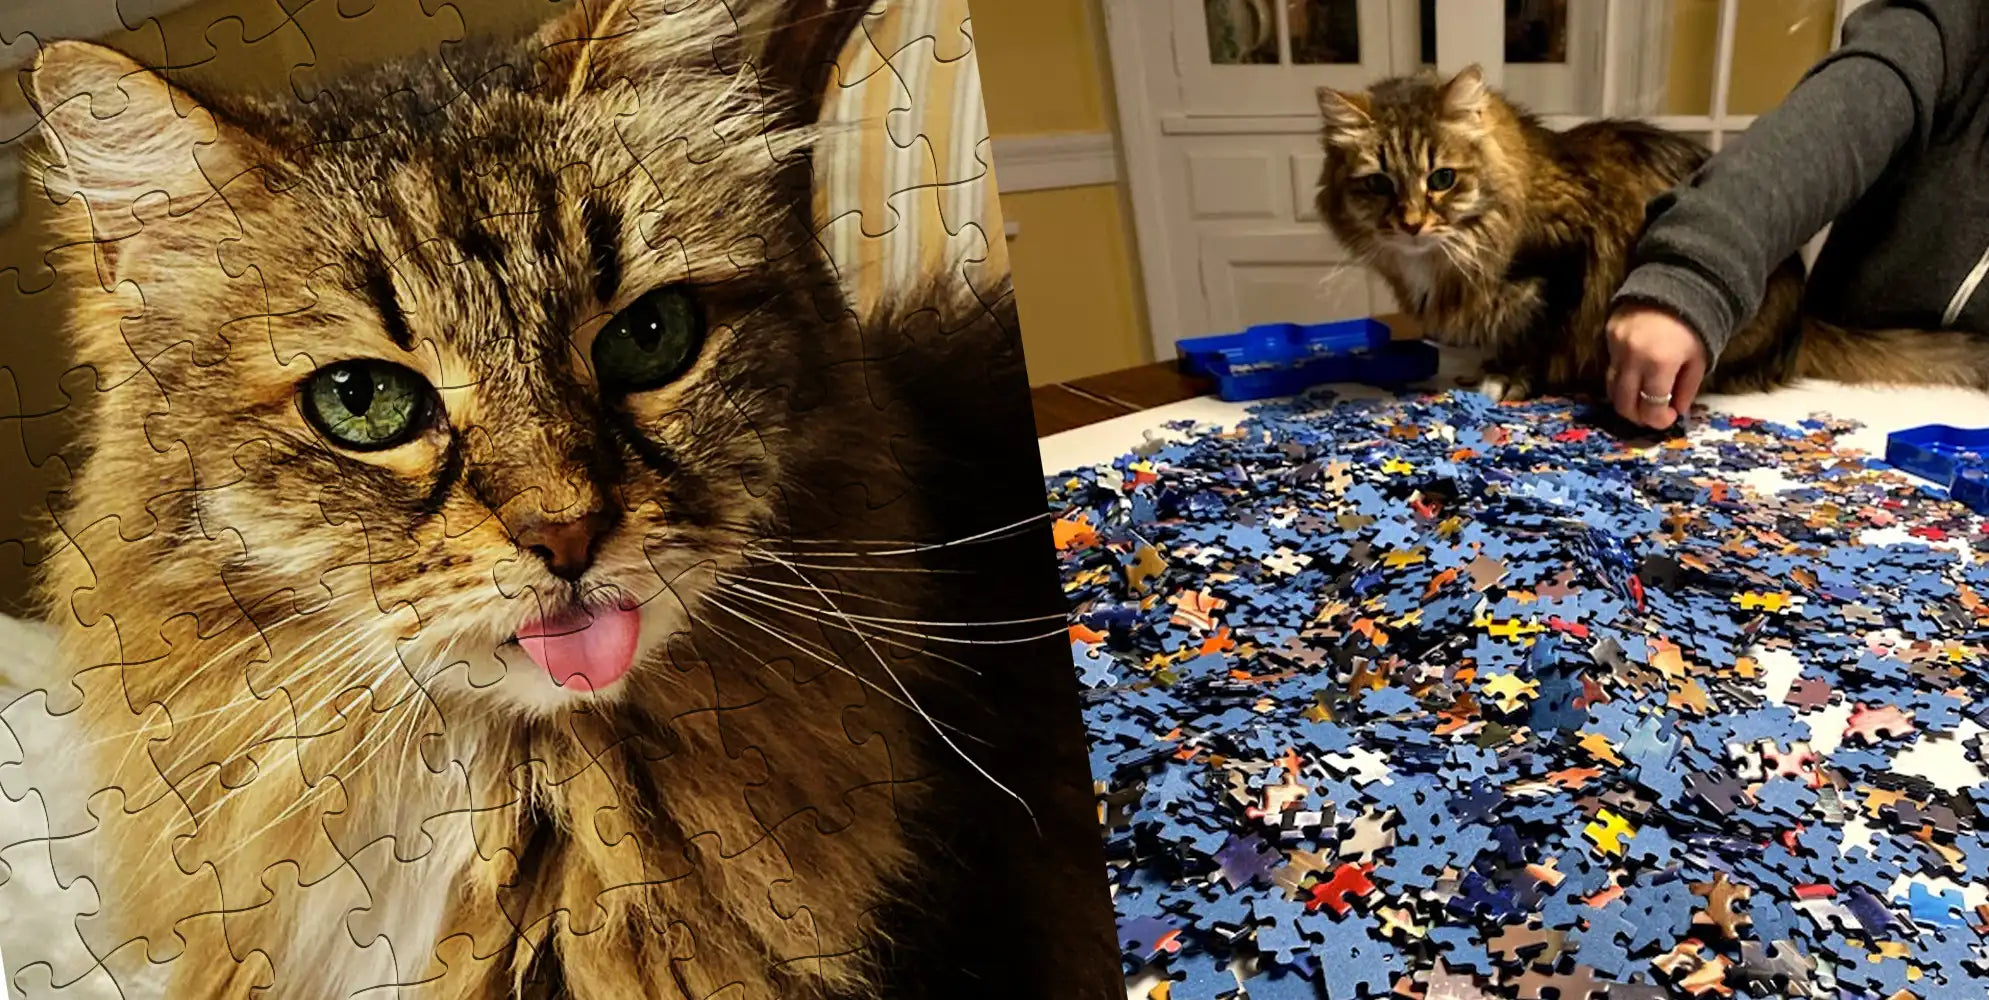 On the left is a finished jigsaw puzzle of a brown cat. On the right is a pile of jigsaw pieces.